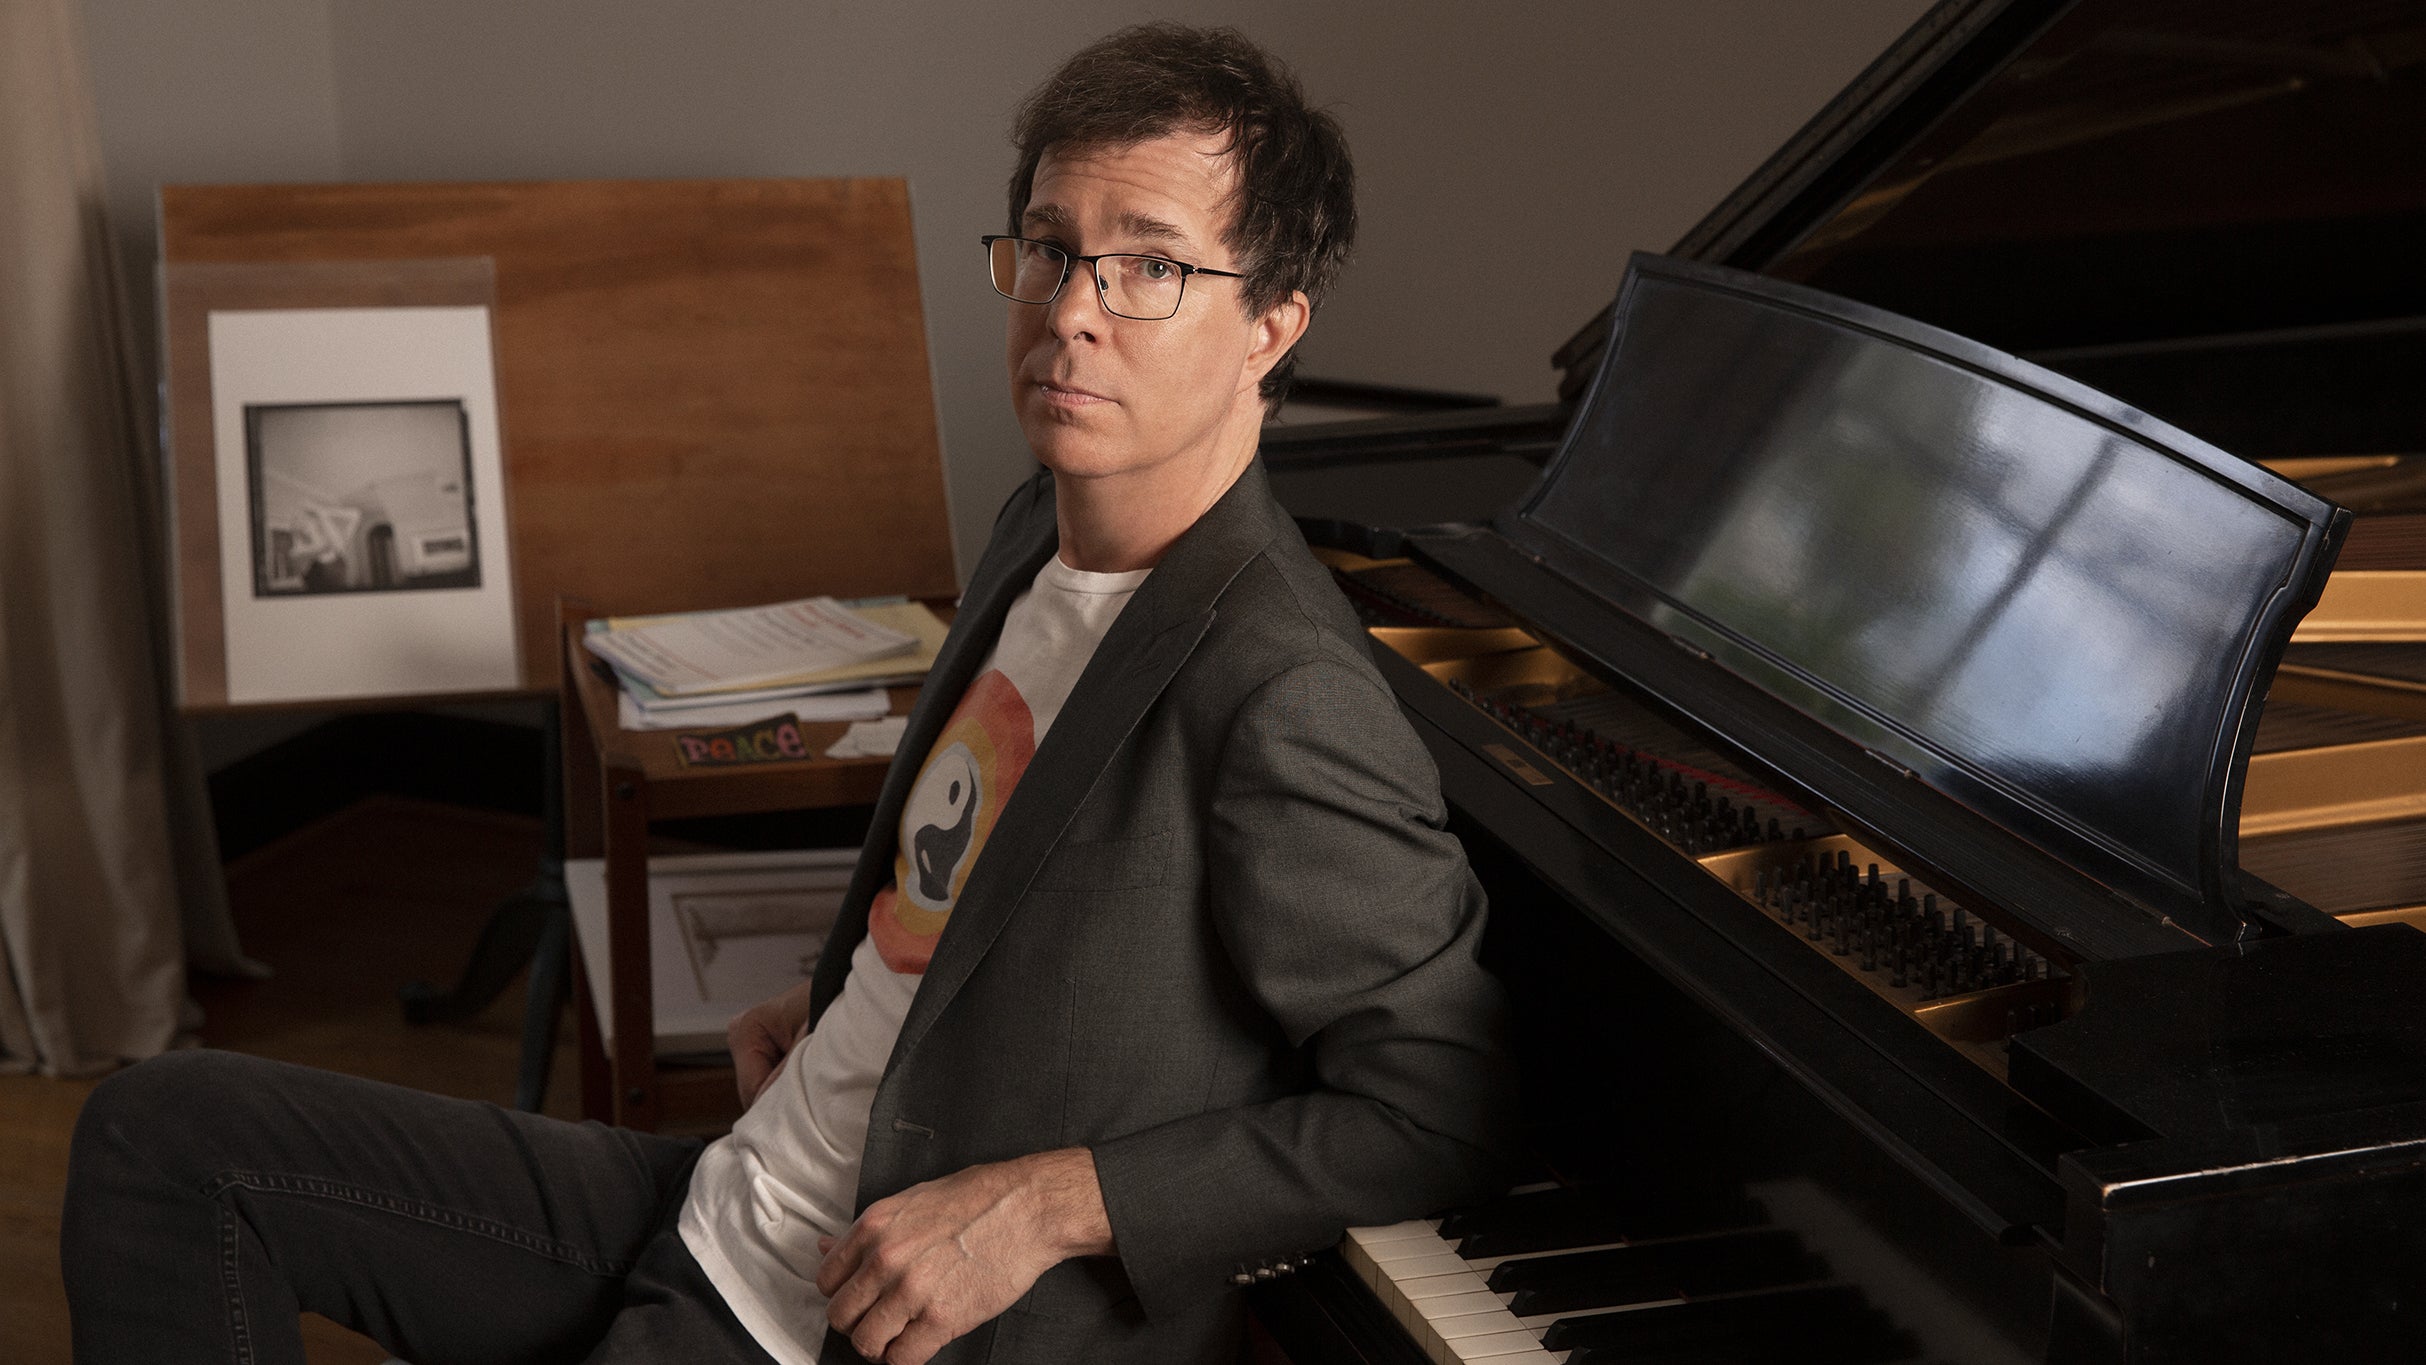 Ben Folds: What Matters Most Tour free presale code for performance tickets in Oakland, CA (Fox Theater - Oakland)